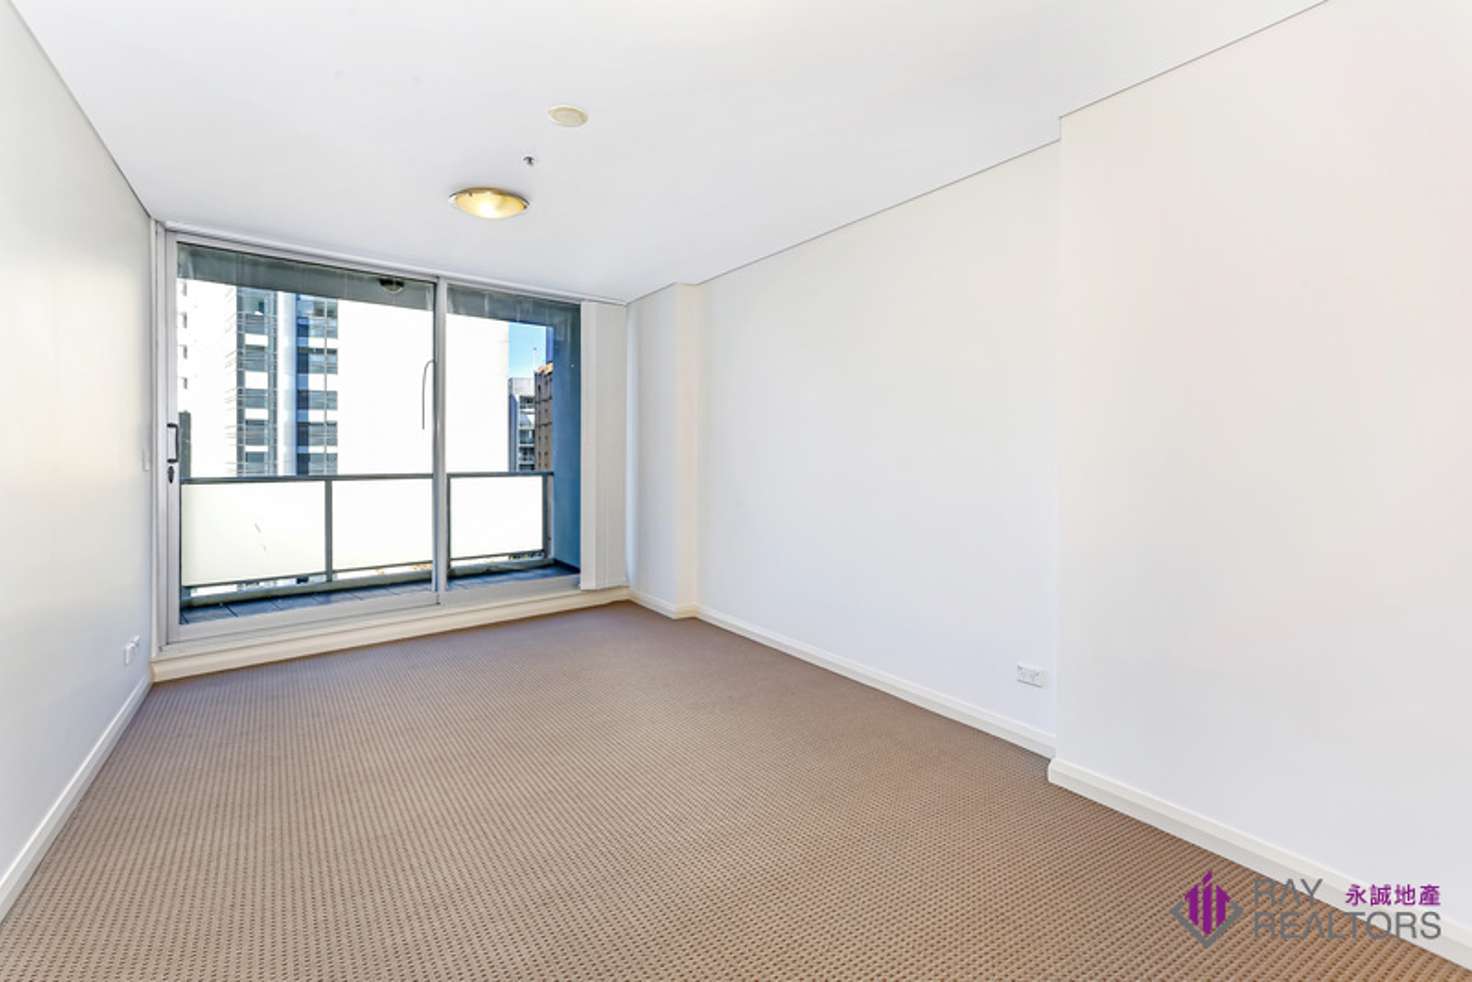 Main view of Homely apartment listing, 46/849 George Street, Ultimo NSW 2007